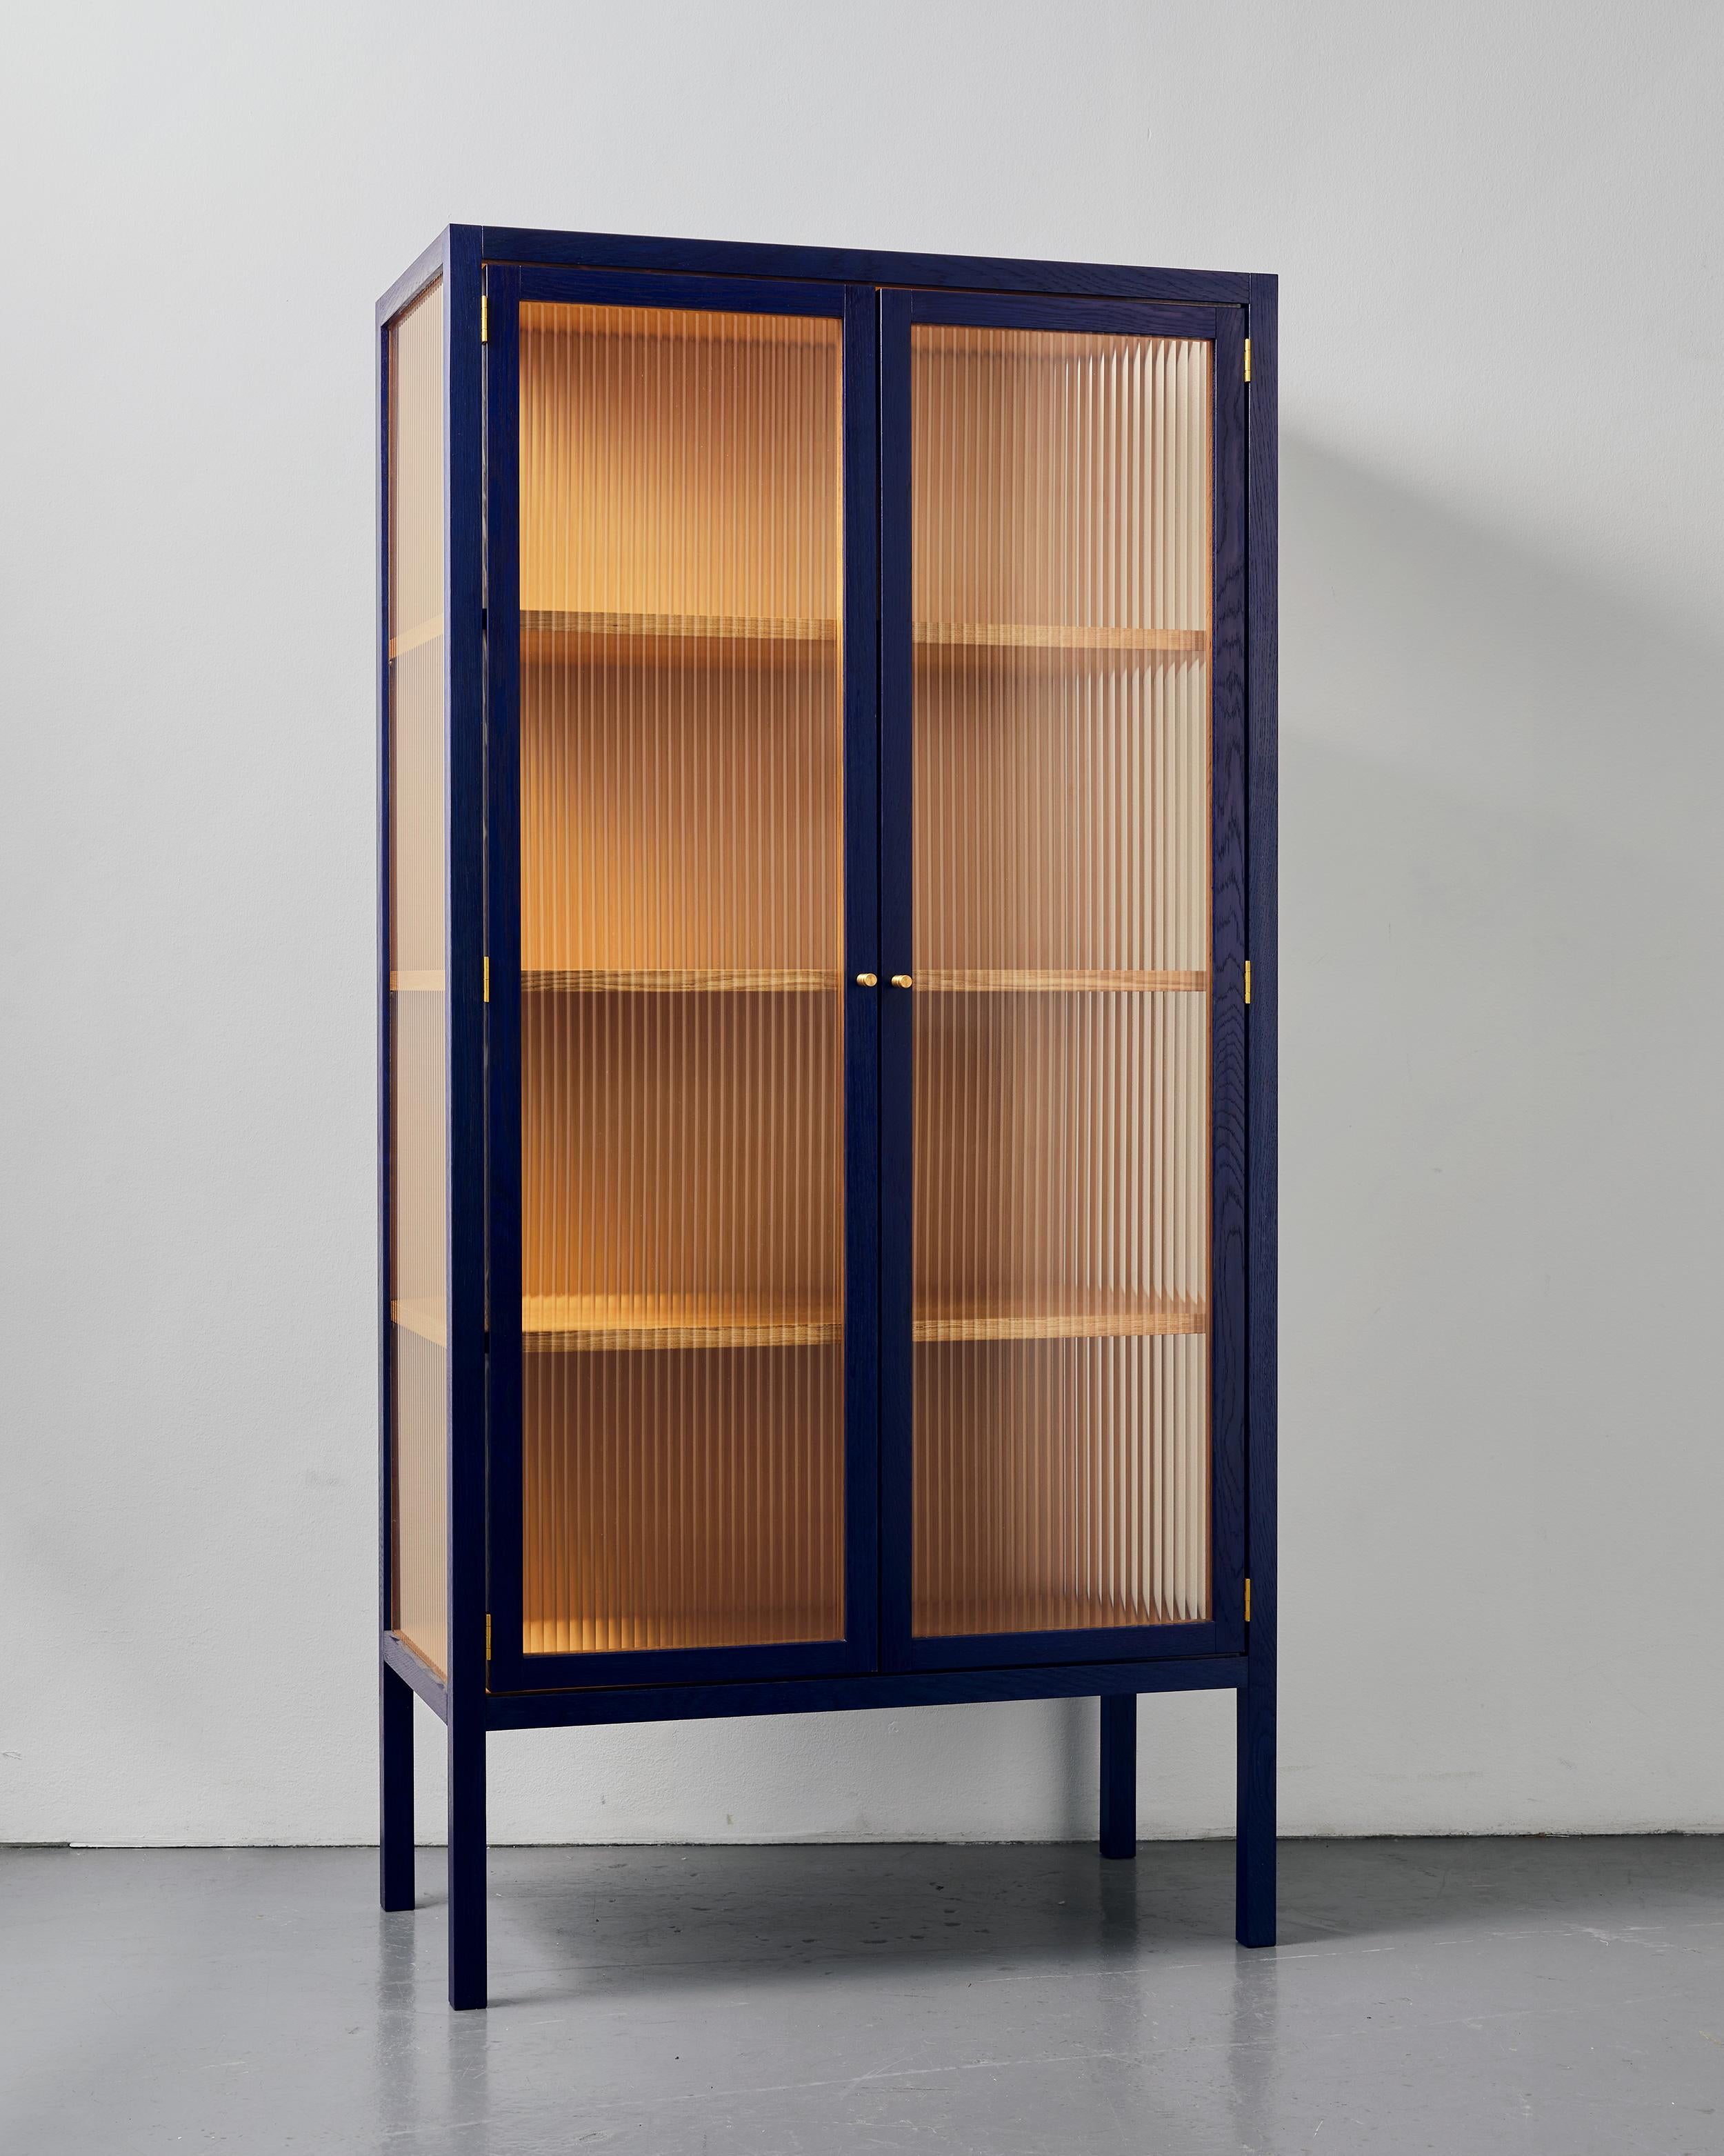 Alma Cabinet is a minimalist cabinet designed by Copenhagen-based atelier BACD studio. The Alma cabinet is created from a vision of simple but good craftsmanship. Built from quality materials, the clean silhouette is made possible through thoughtful